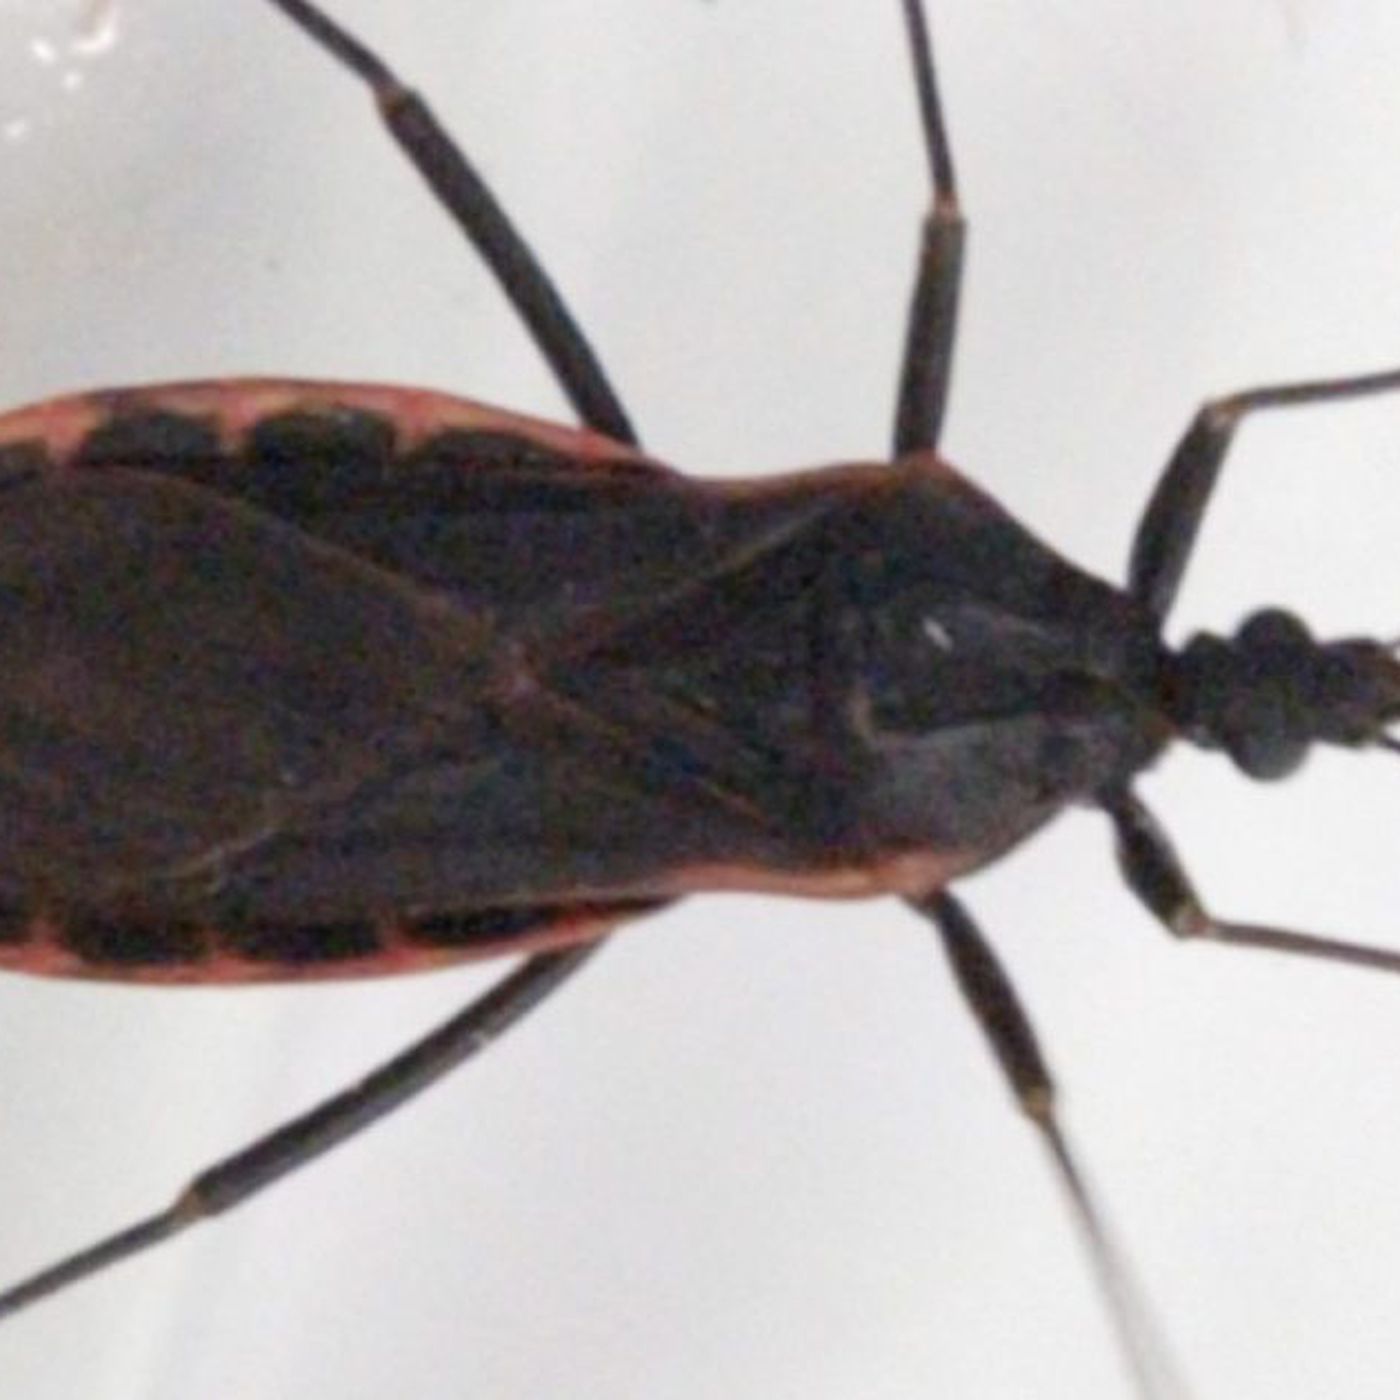 Kissing bug carrying fatal disease reported in Illinois CDC says